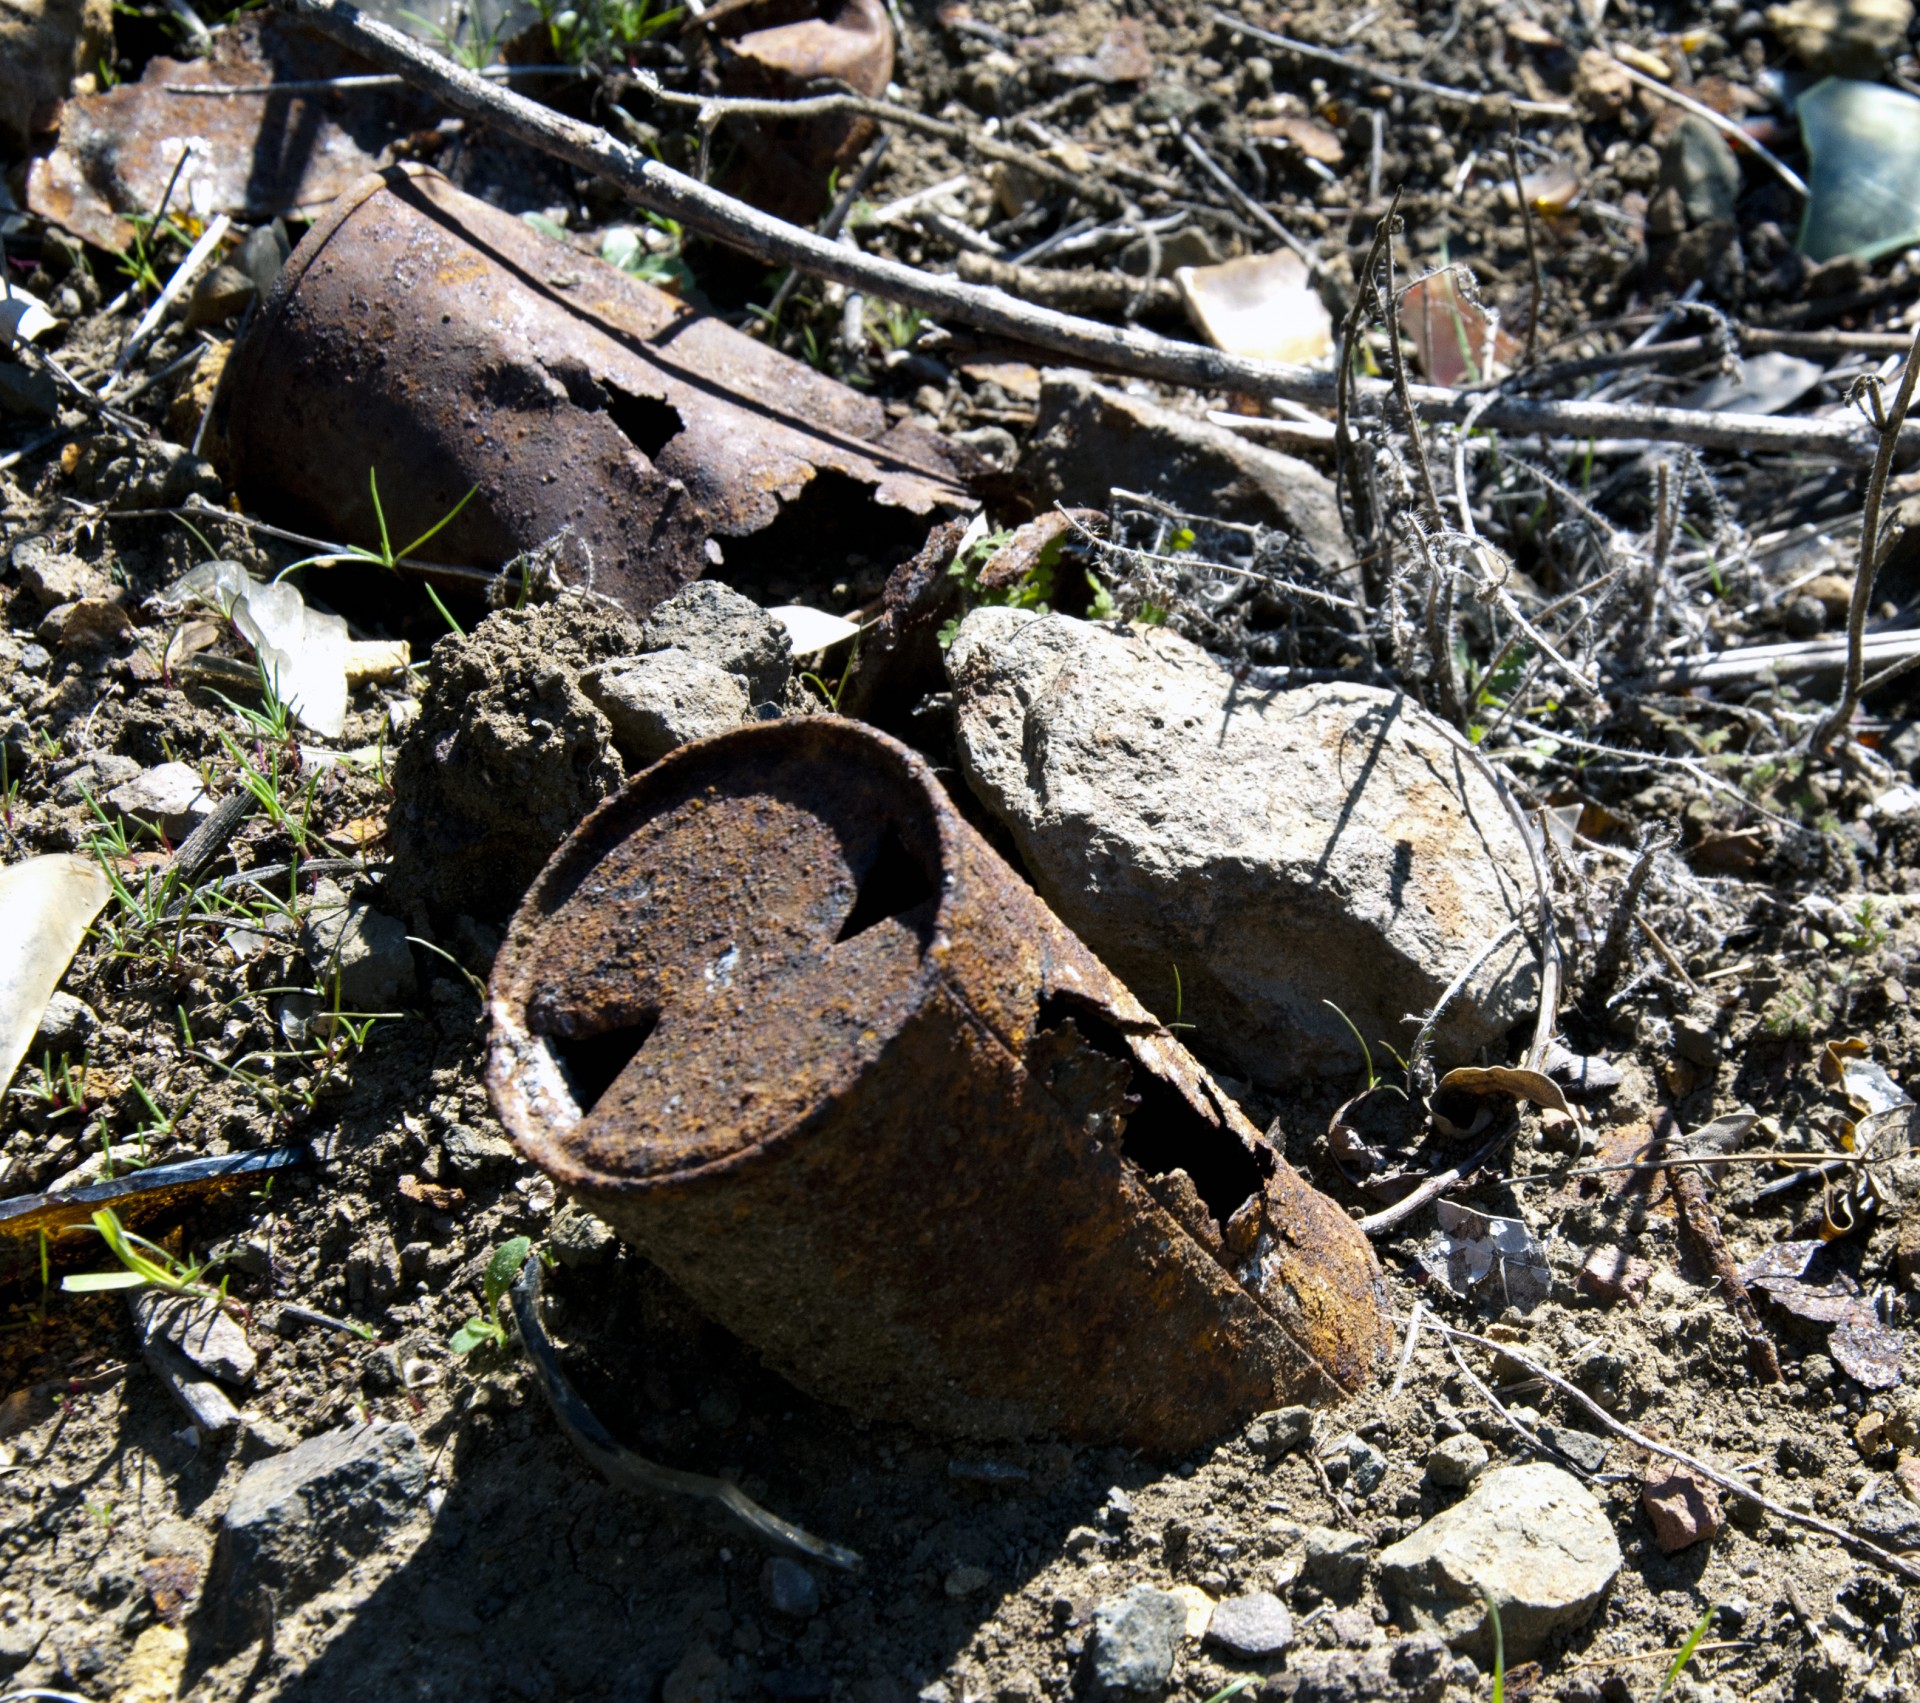 Old tin can with diamond-shaped hole punch at the top